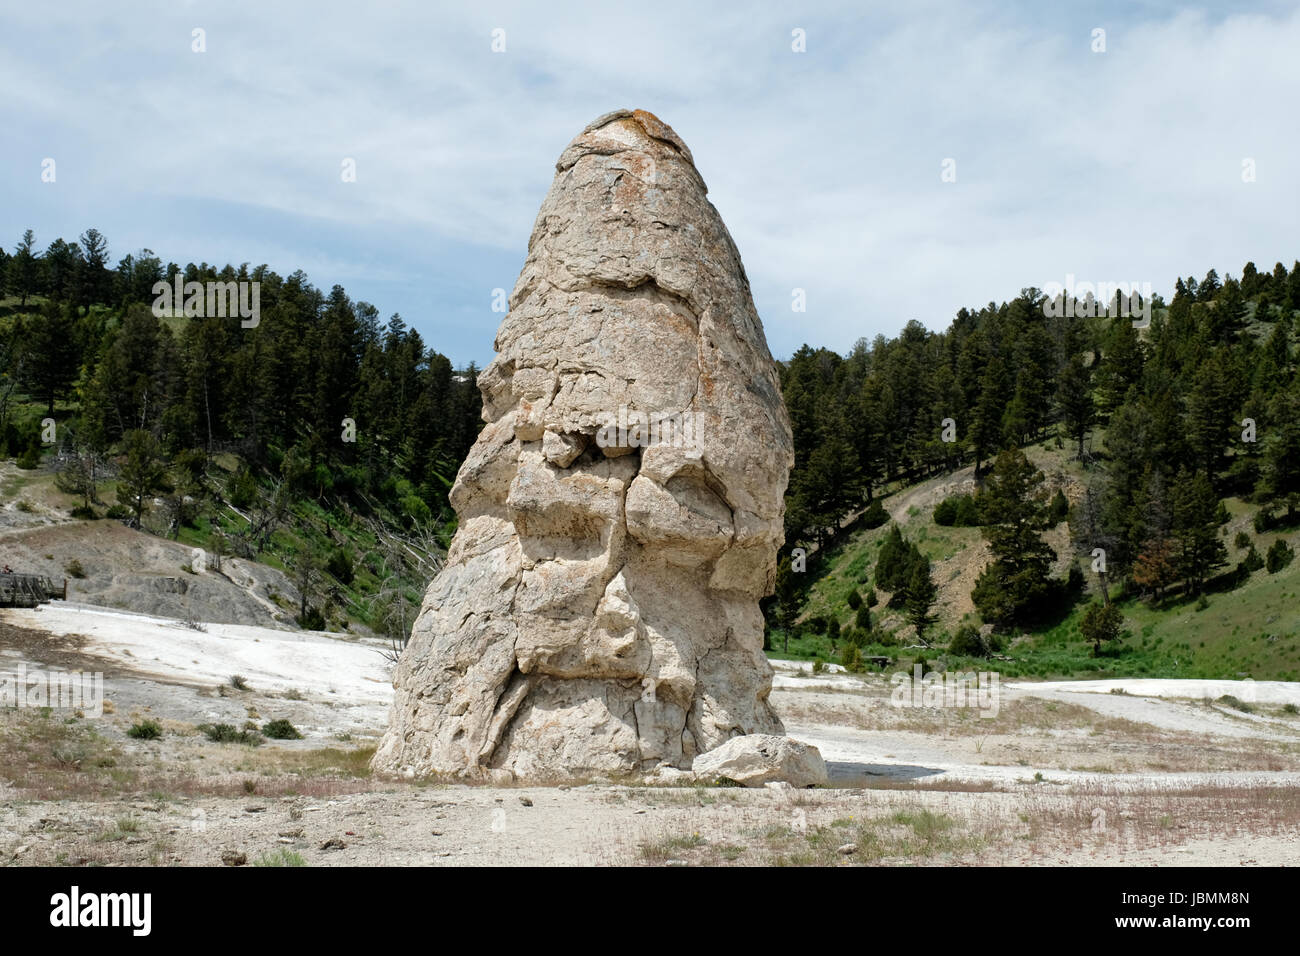 Liberty Cap Thermalquelle Kegel befindet sich in Mammoth Hot Springs im Yellowstone-Nationalpark, Wyoming, USA. Stockfoto